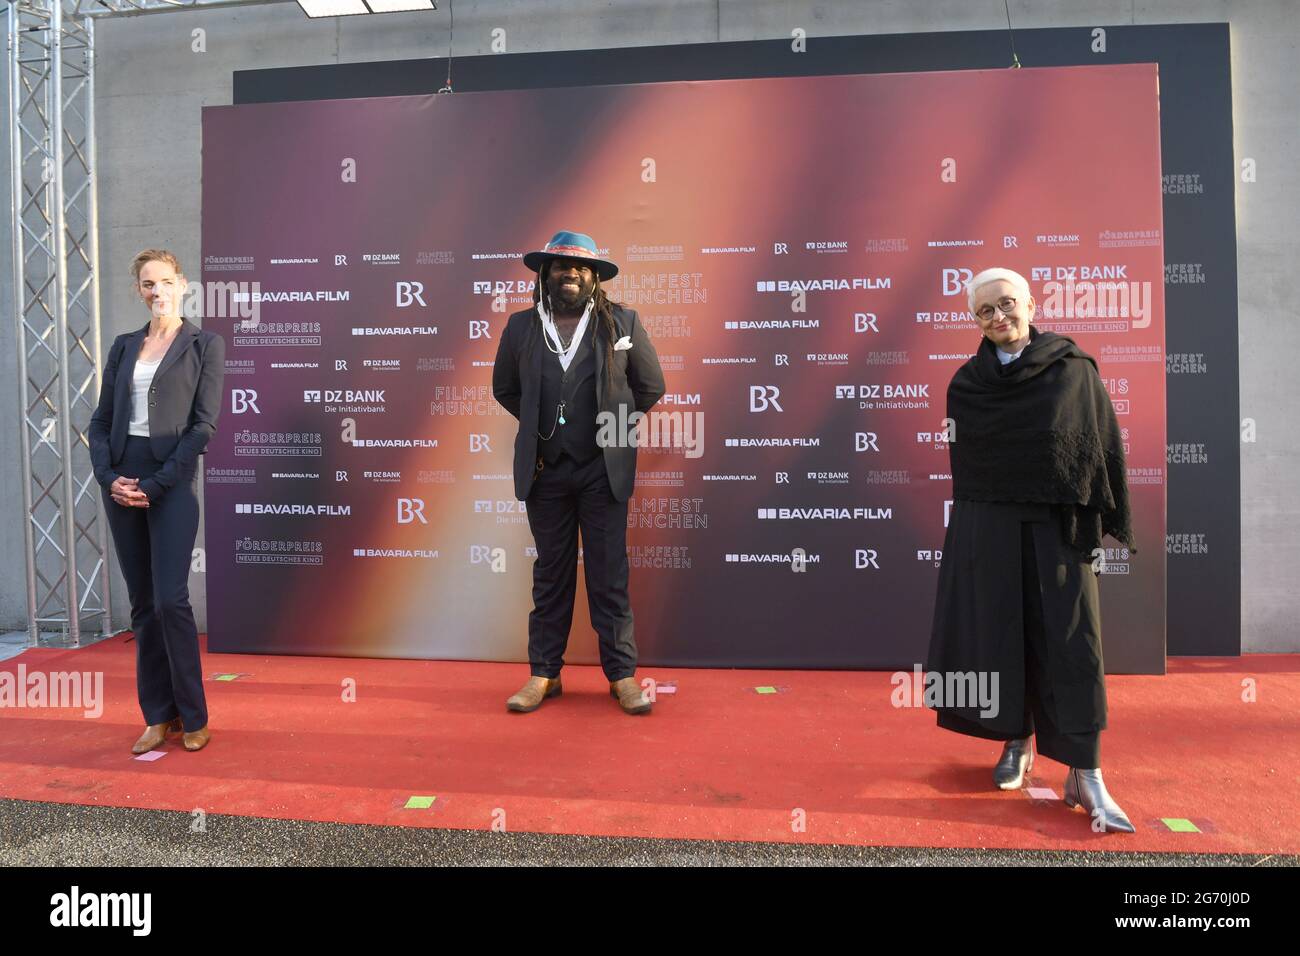 Munich, Germany. 09th July, 2021. The jury Sophie von Kessel, actress, (l-r) Komi M. Togbonou, actor and Münchner Kammerspiele ensemble member and Barbara Mundel, artistic director of Münchner Kammerspiele arrive at the award ceremony of the New German Cinema Award in front of the University of Television and Film. The award is presented in several categories such as directing, acting, screenplay or production and is endowed with a total of 70,000 euros. The prize sponsors are Bayerischer Rundfunk, Bavaria Film and DZ Bank. Credit: Felix Hörhager/dpa/Alamy Live News Stock Photo